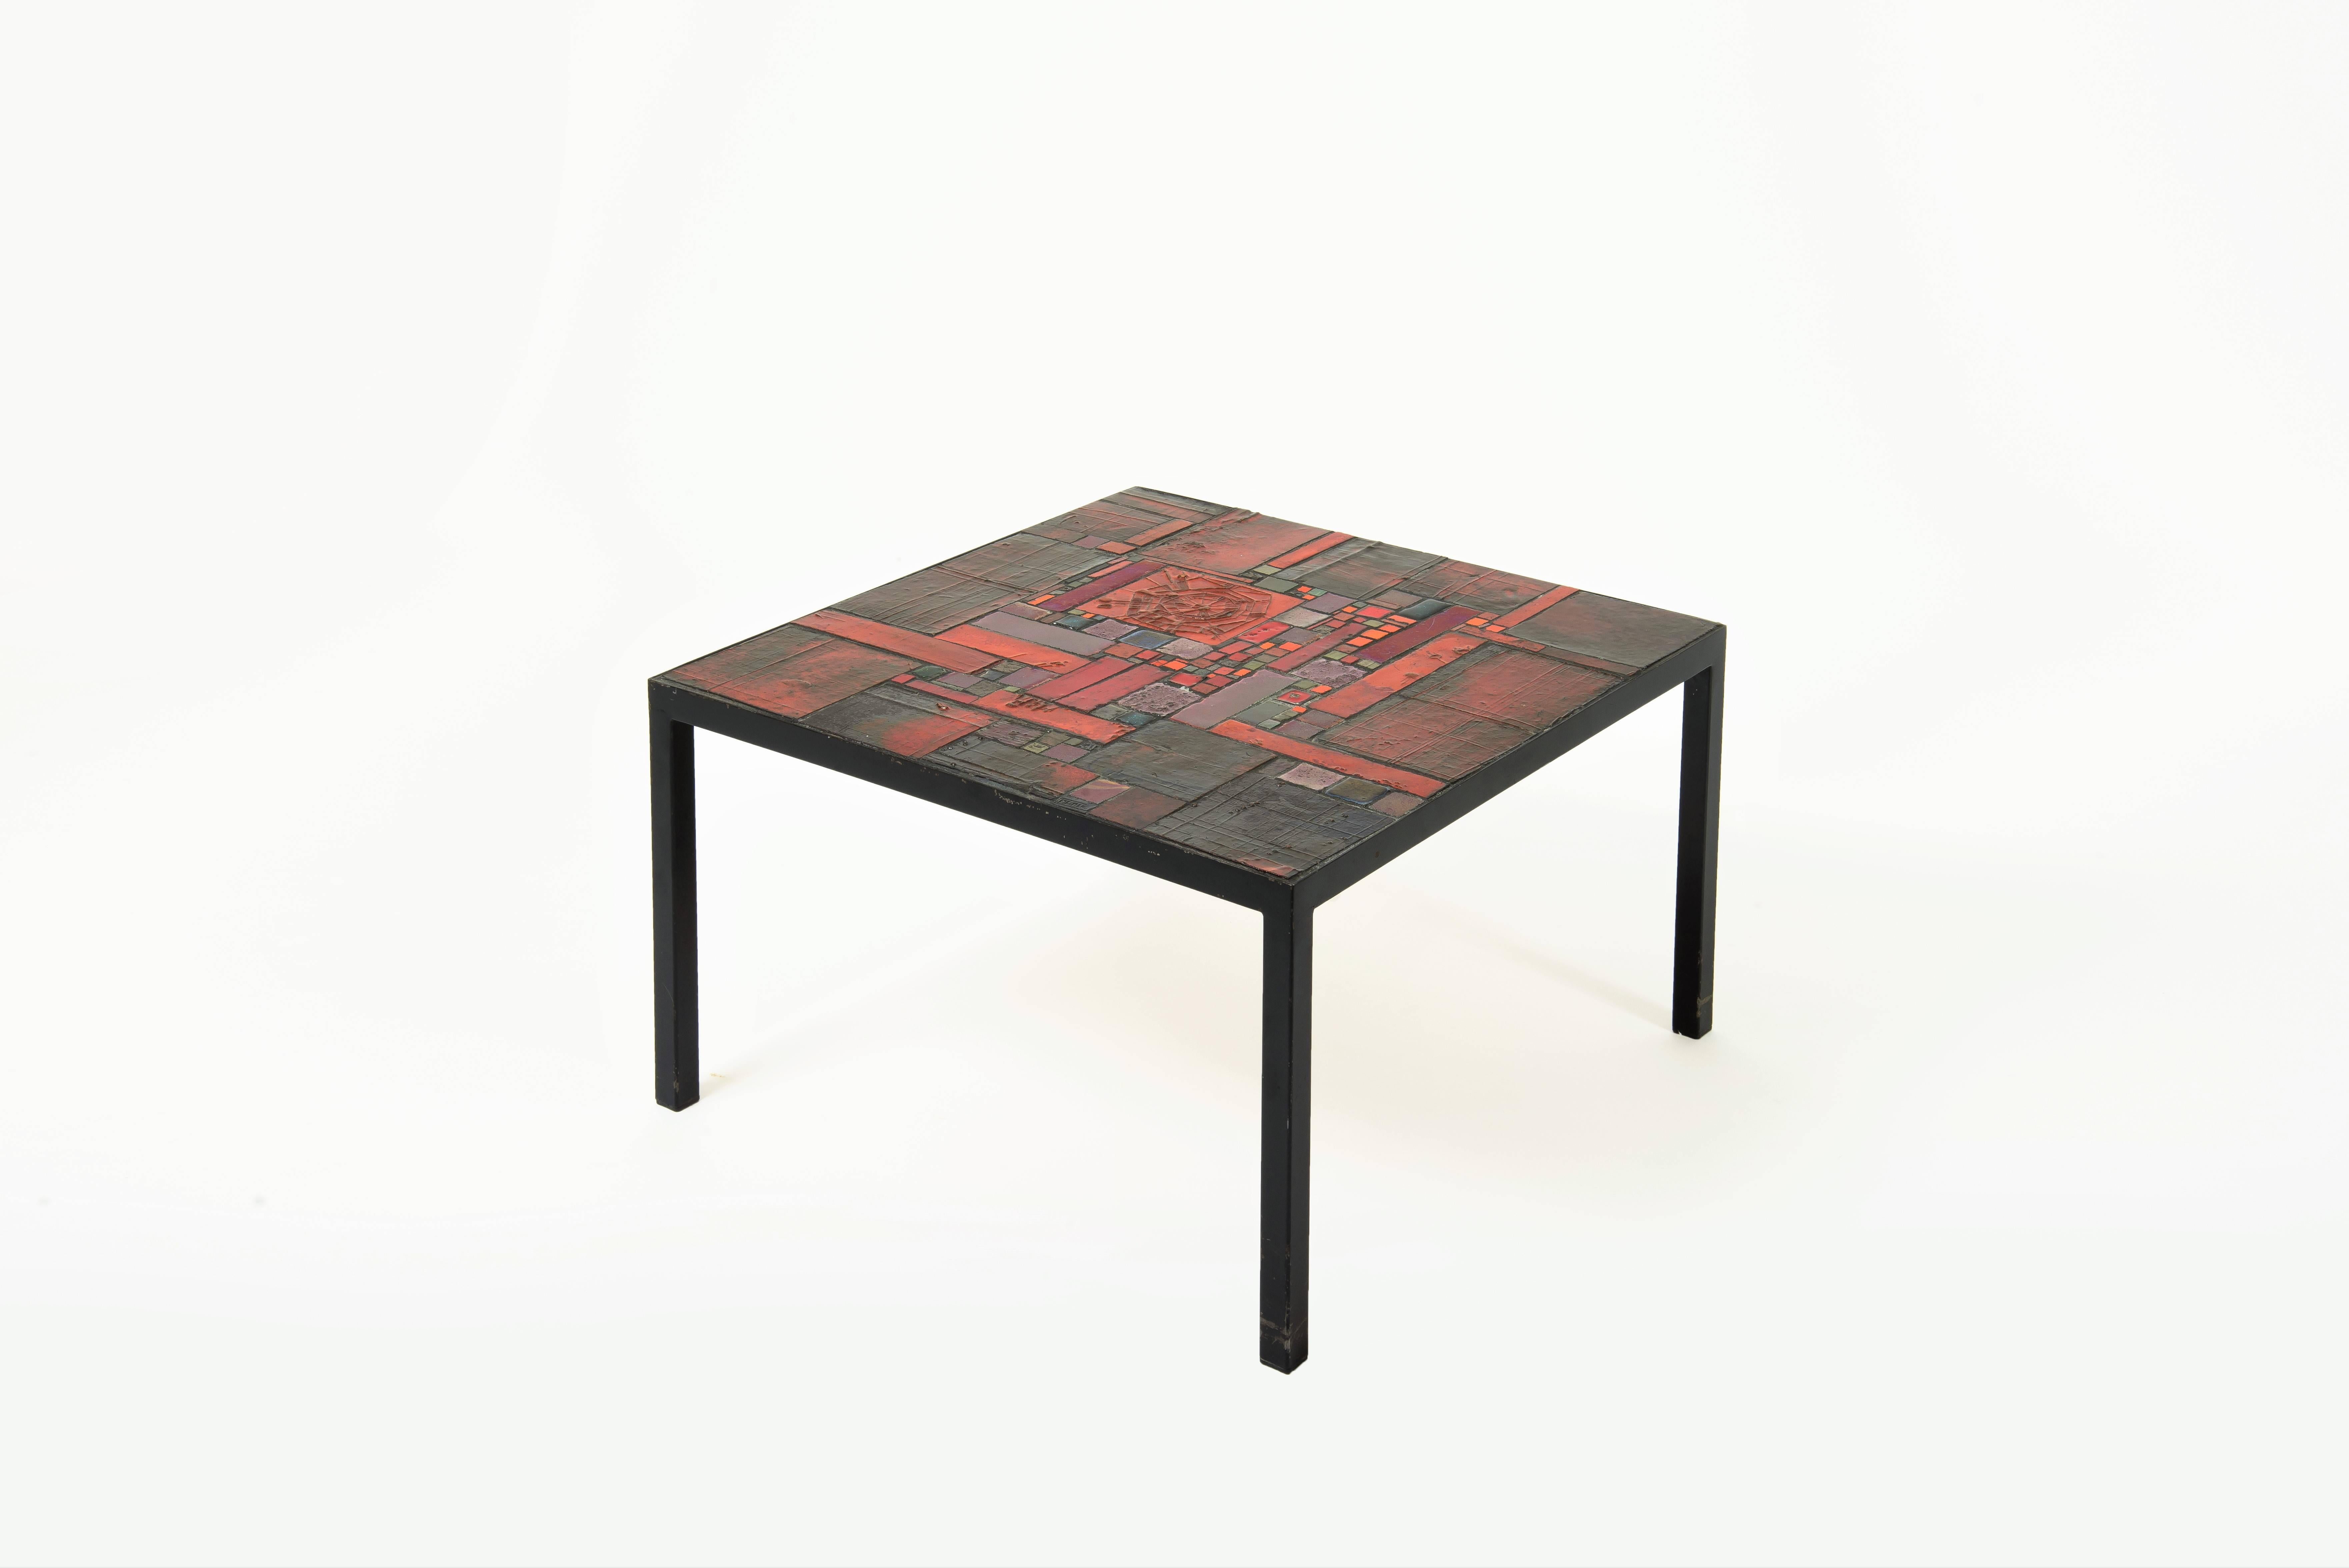 Impressive low table by Pia Manu, Belgium. Ceramic tiles and blue glass 